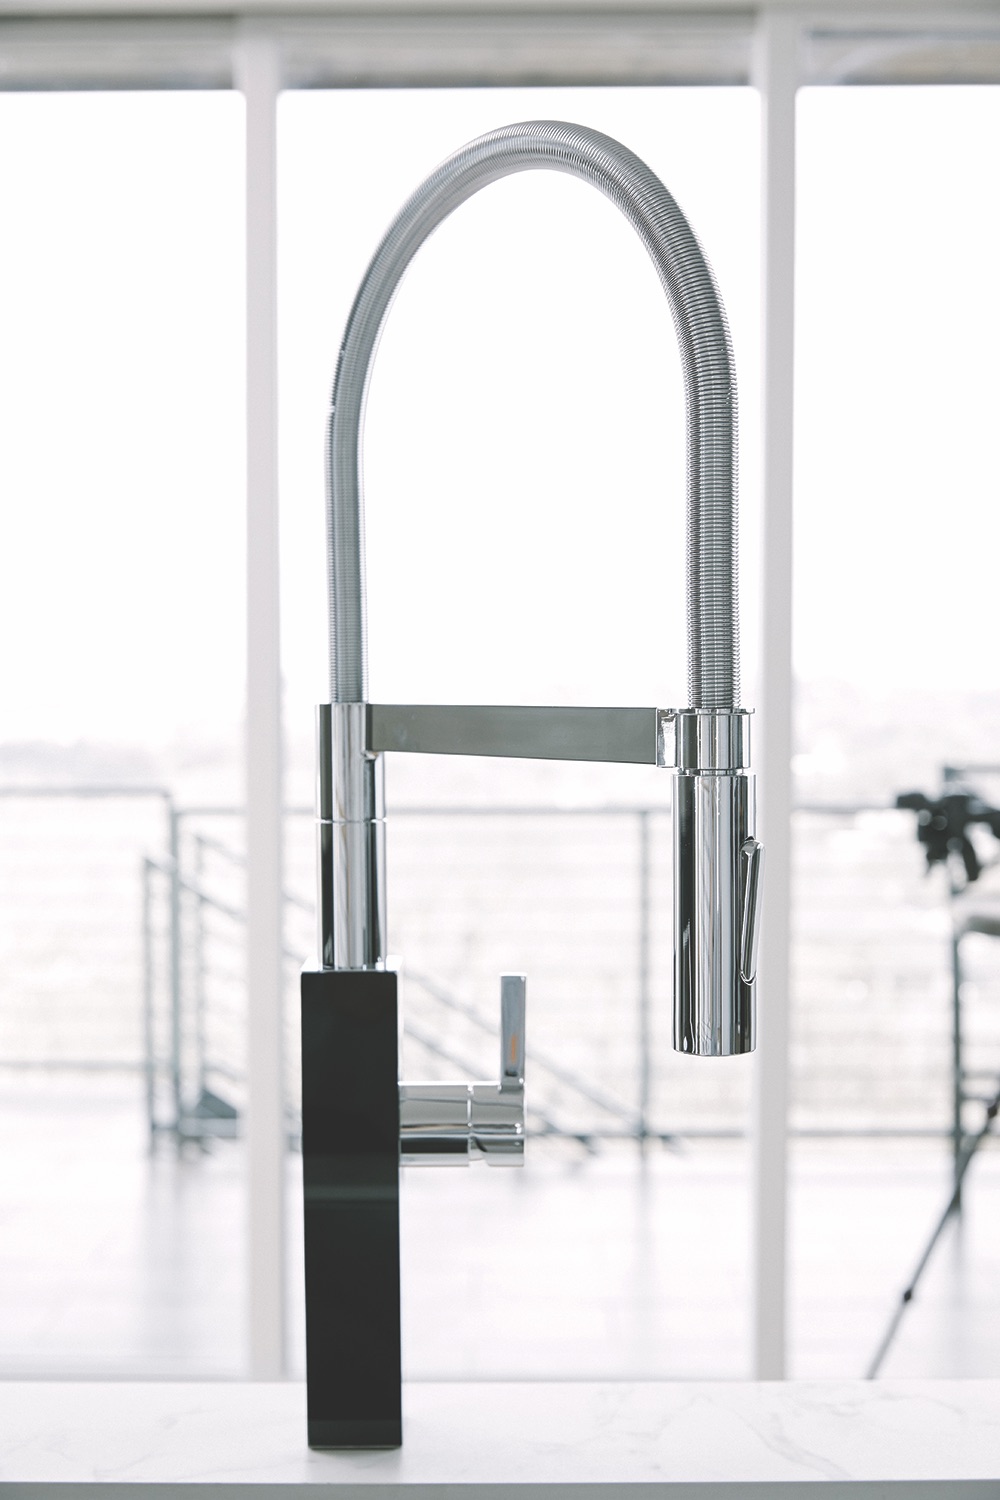 Franke’s Crystal Collection is billed as a state-of-the-art line integrating high-quality stainless steel and glass with a sleek base